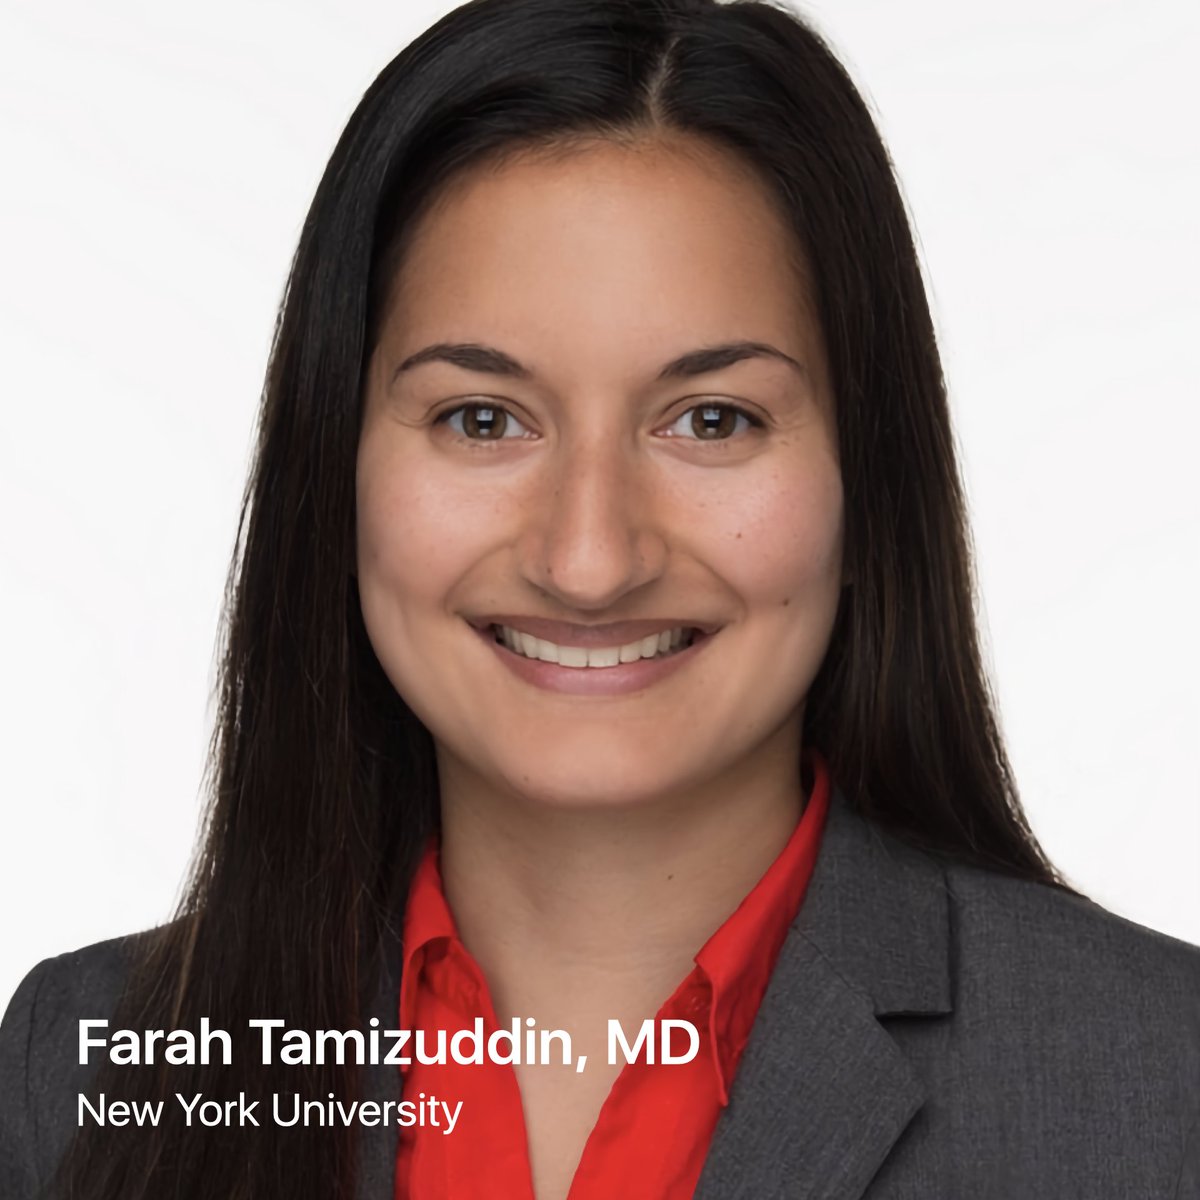 STR Young Radiologists Spotlight Dr. Farah Tamizuddin @FTamizuddin PGY-5 @NYURadRes NYU @NYUImaging Q. Why did you choose a career in radiology? A. 'When I started medical school, I was very unfamiliar with radiology, to the extent that I barely understood it was an option for